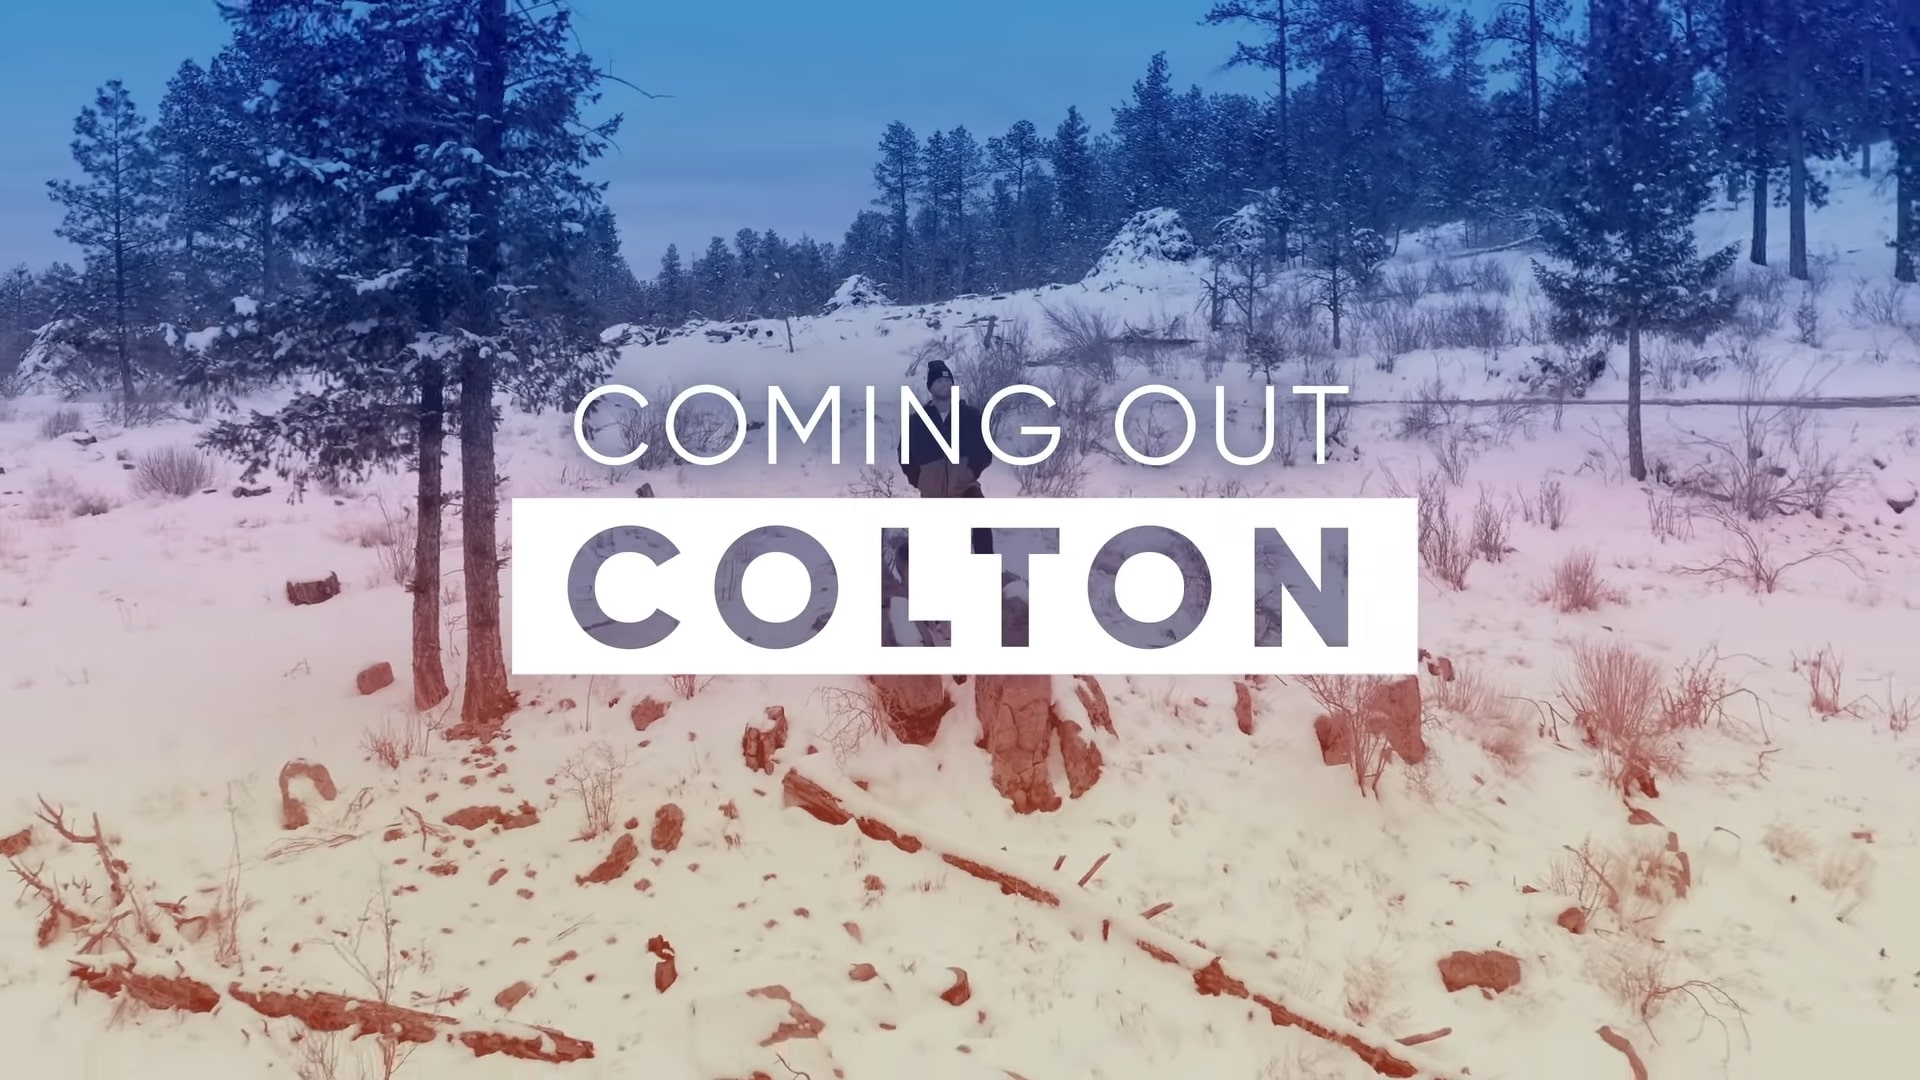 Netflix Coming Out Colton Trailer, Coming to Netflix in December 2021